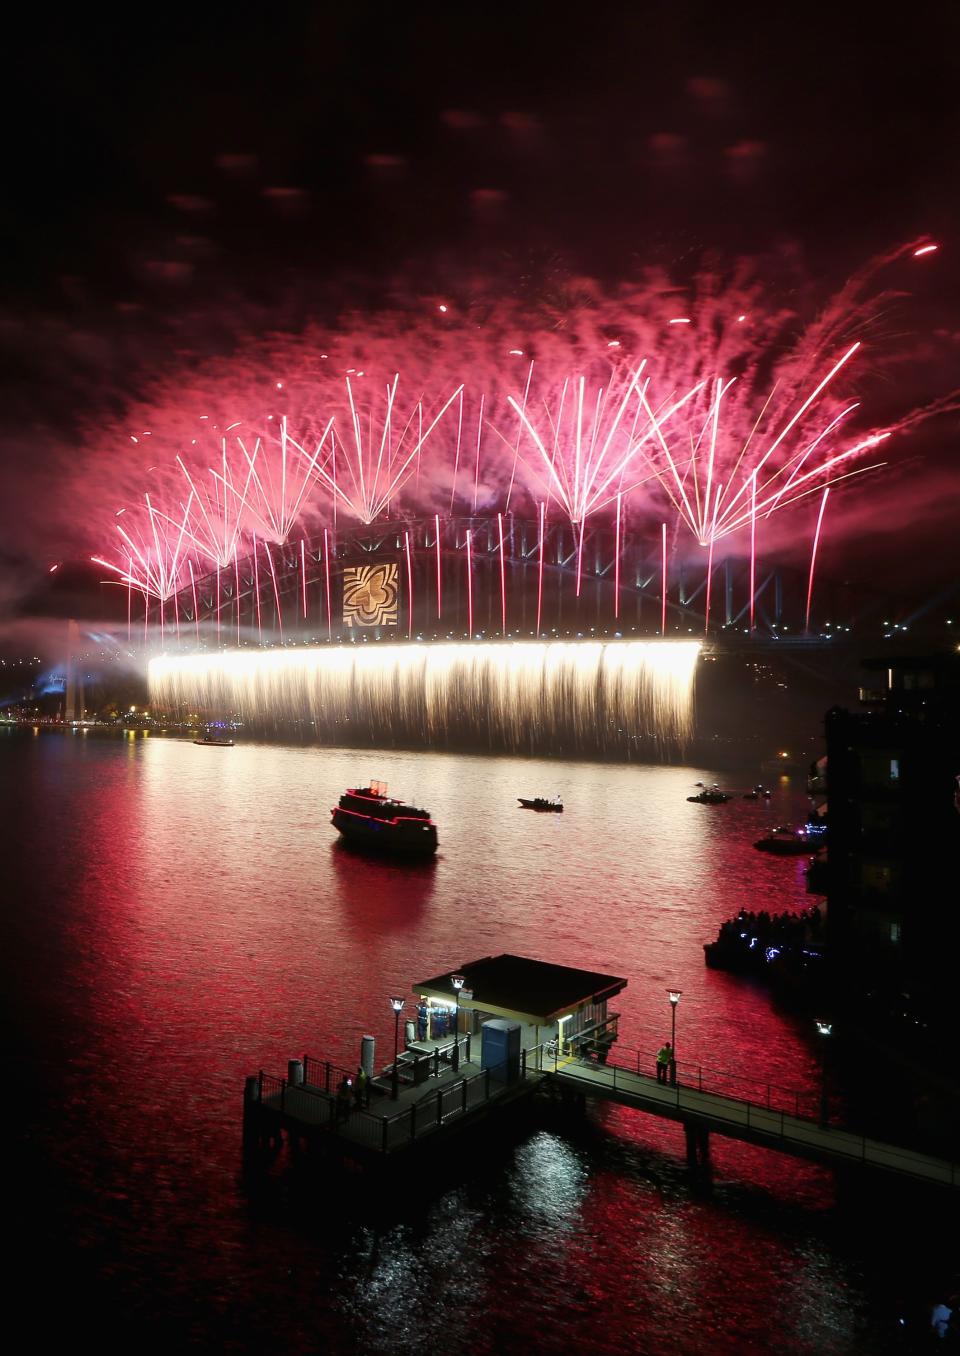 SYDNEY, AUSTRALIA - DECEMBER 31: Fireworks light up the sky above the Sydney Harbour Bridge at midnight during New Years Eve celebrations on Sydney Harbour on December 31, 2012 in Sydney, Australia. (Photo by Cameron Spencer/Getty Images)